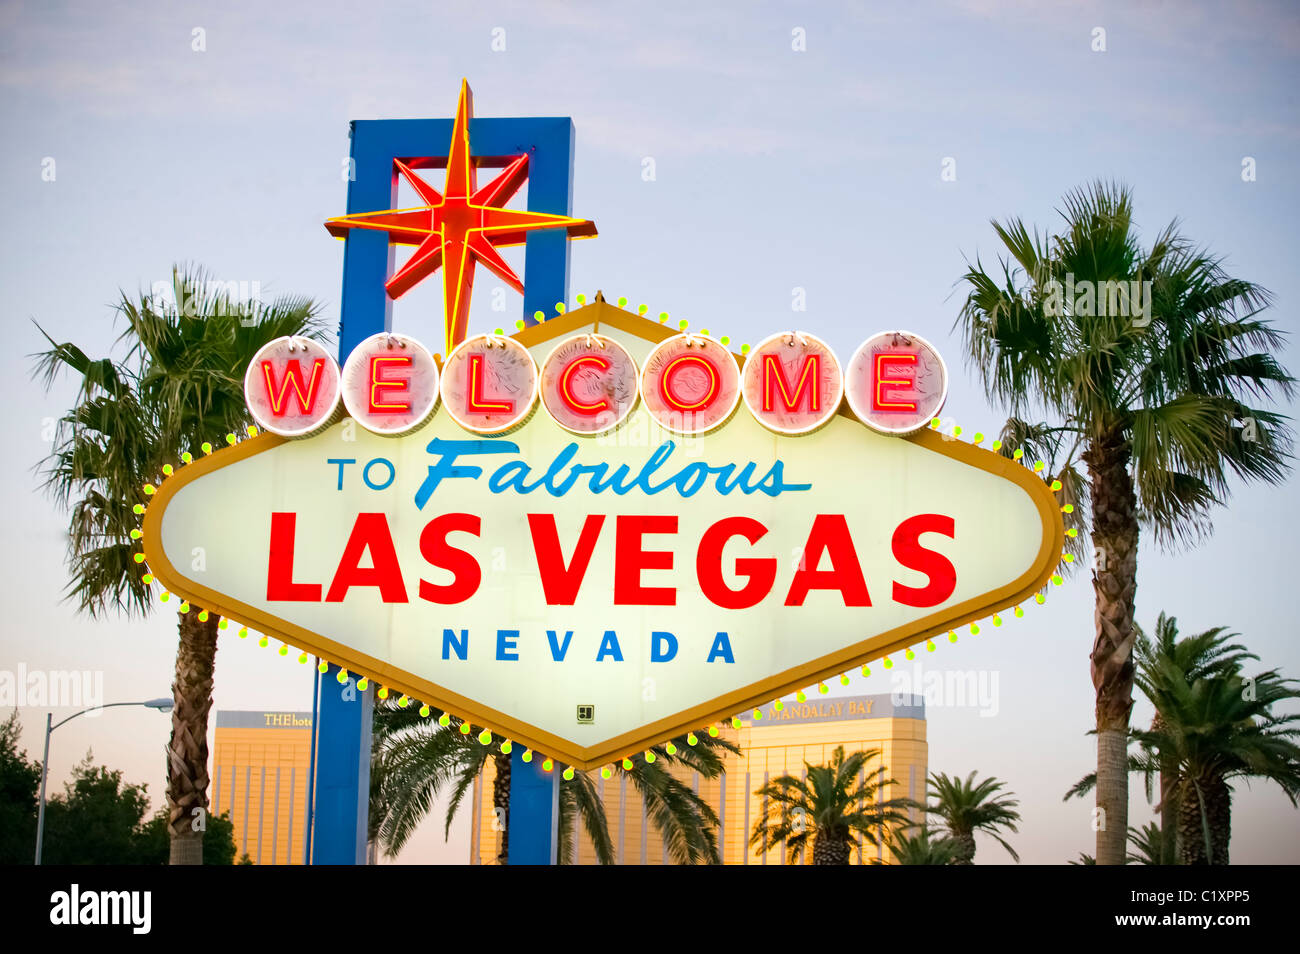 Welcome to Las Vegas sign, Nevada Stock Photo